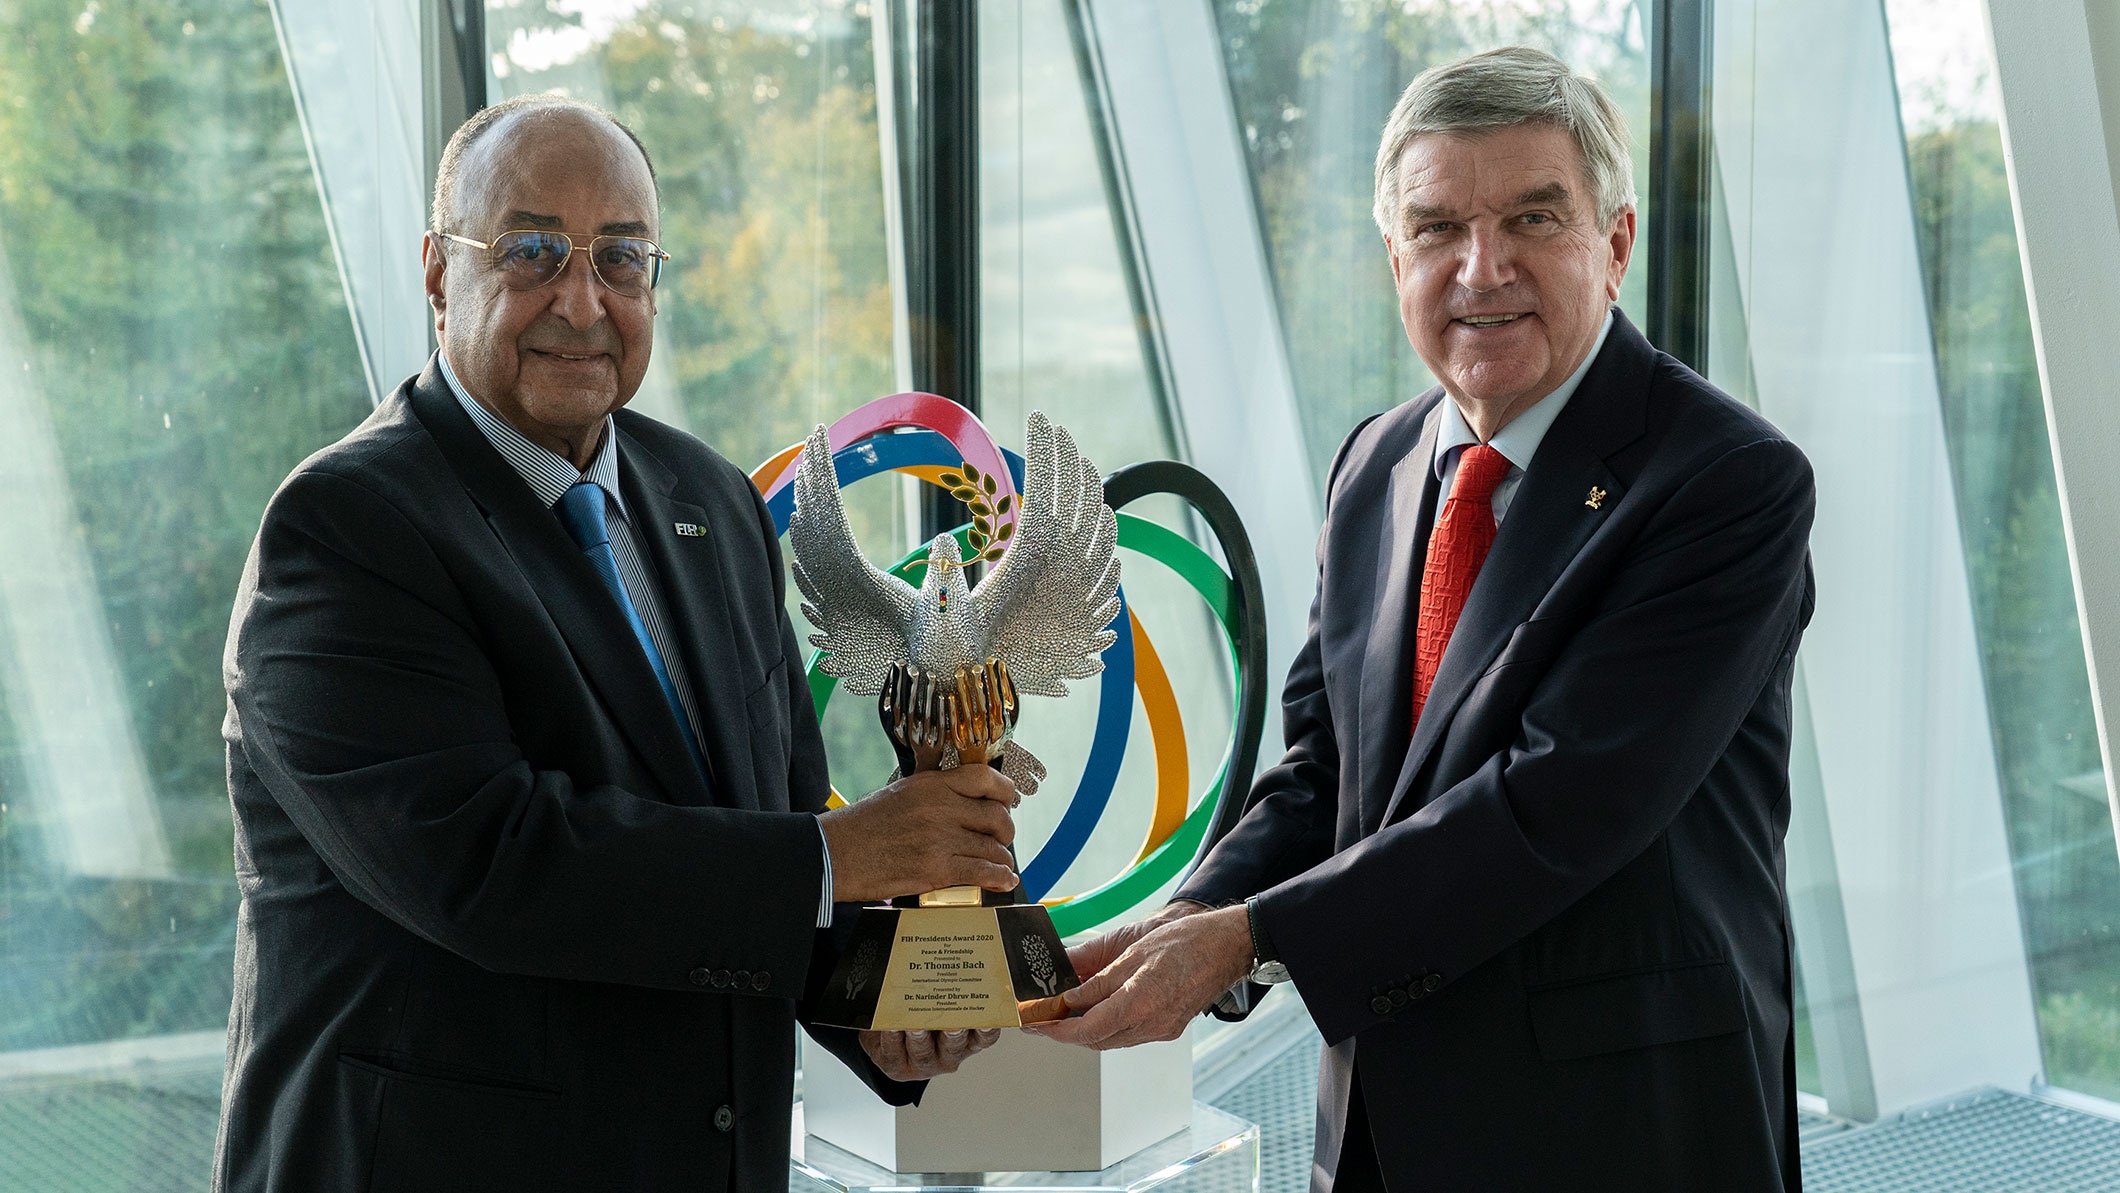 President Bach receives Peace and Friendship Award from the International Hockey Federation (FIH)